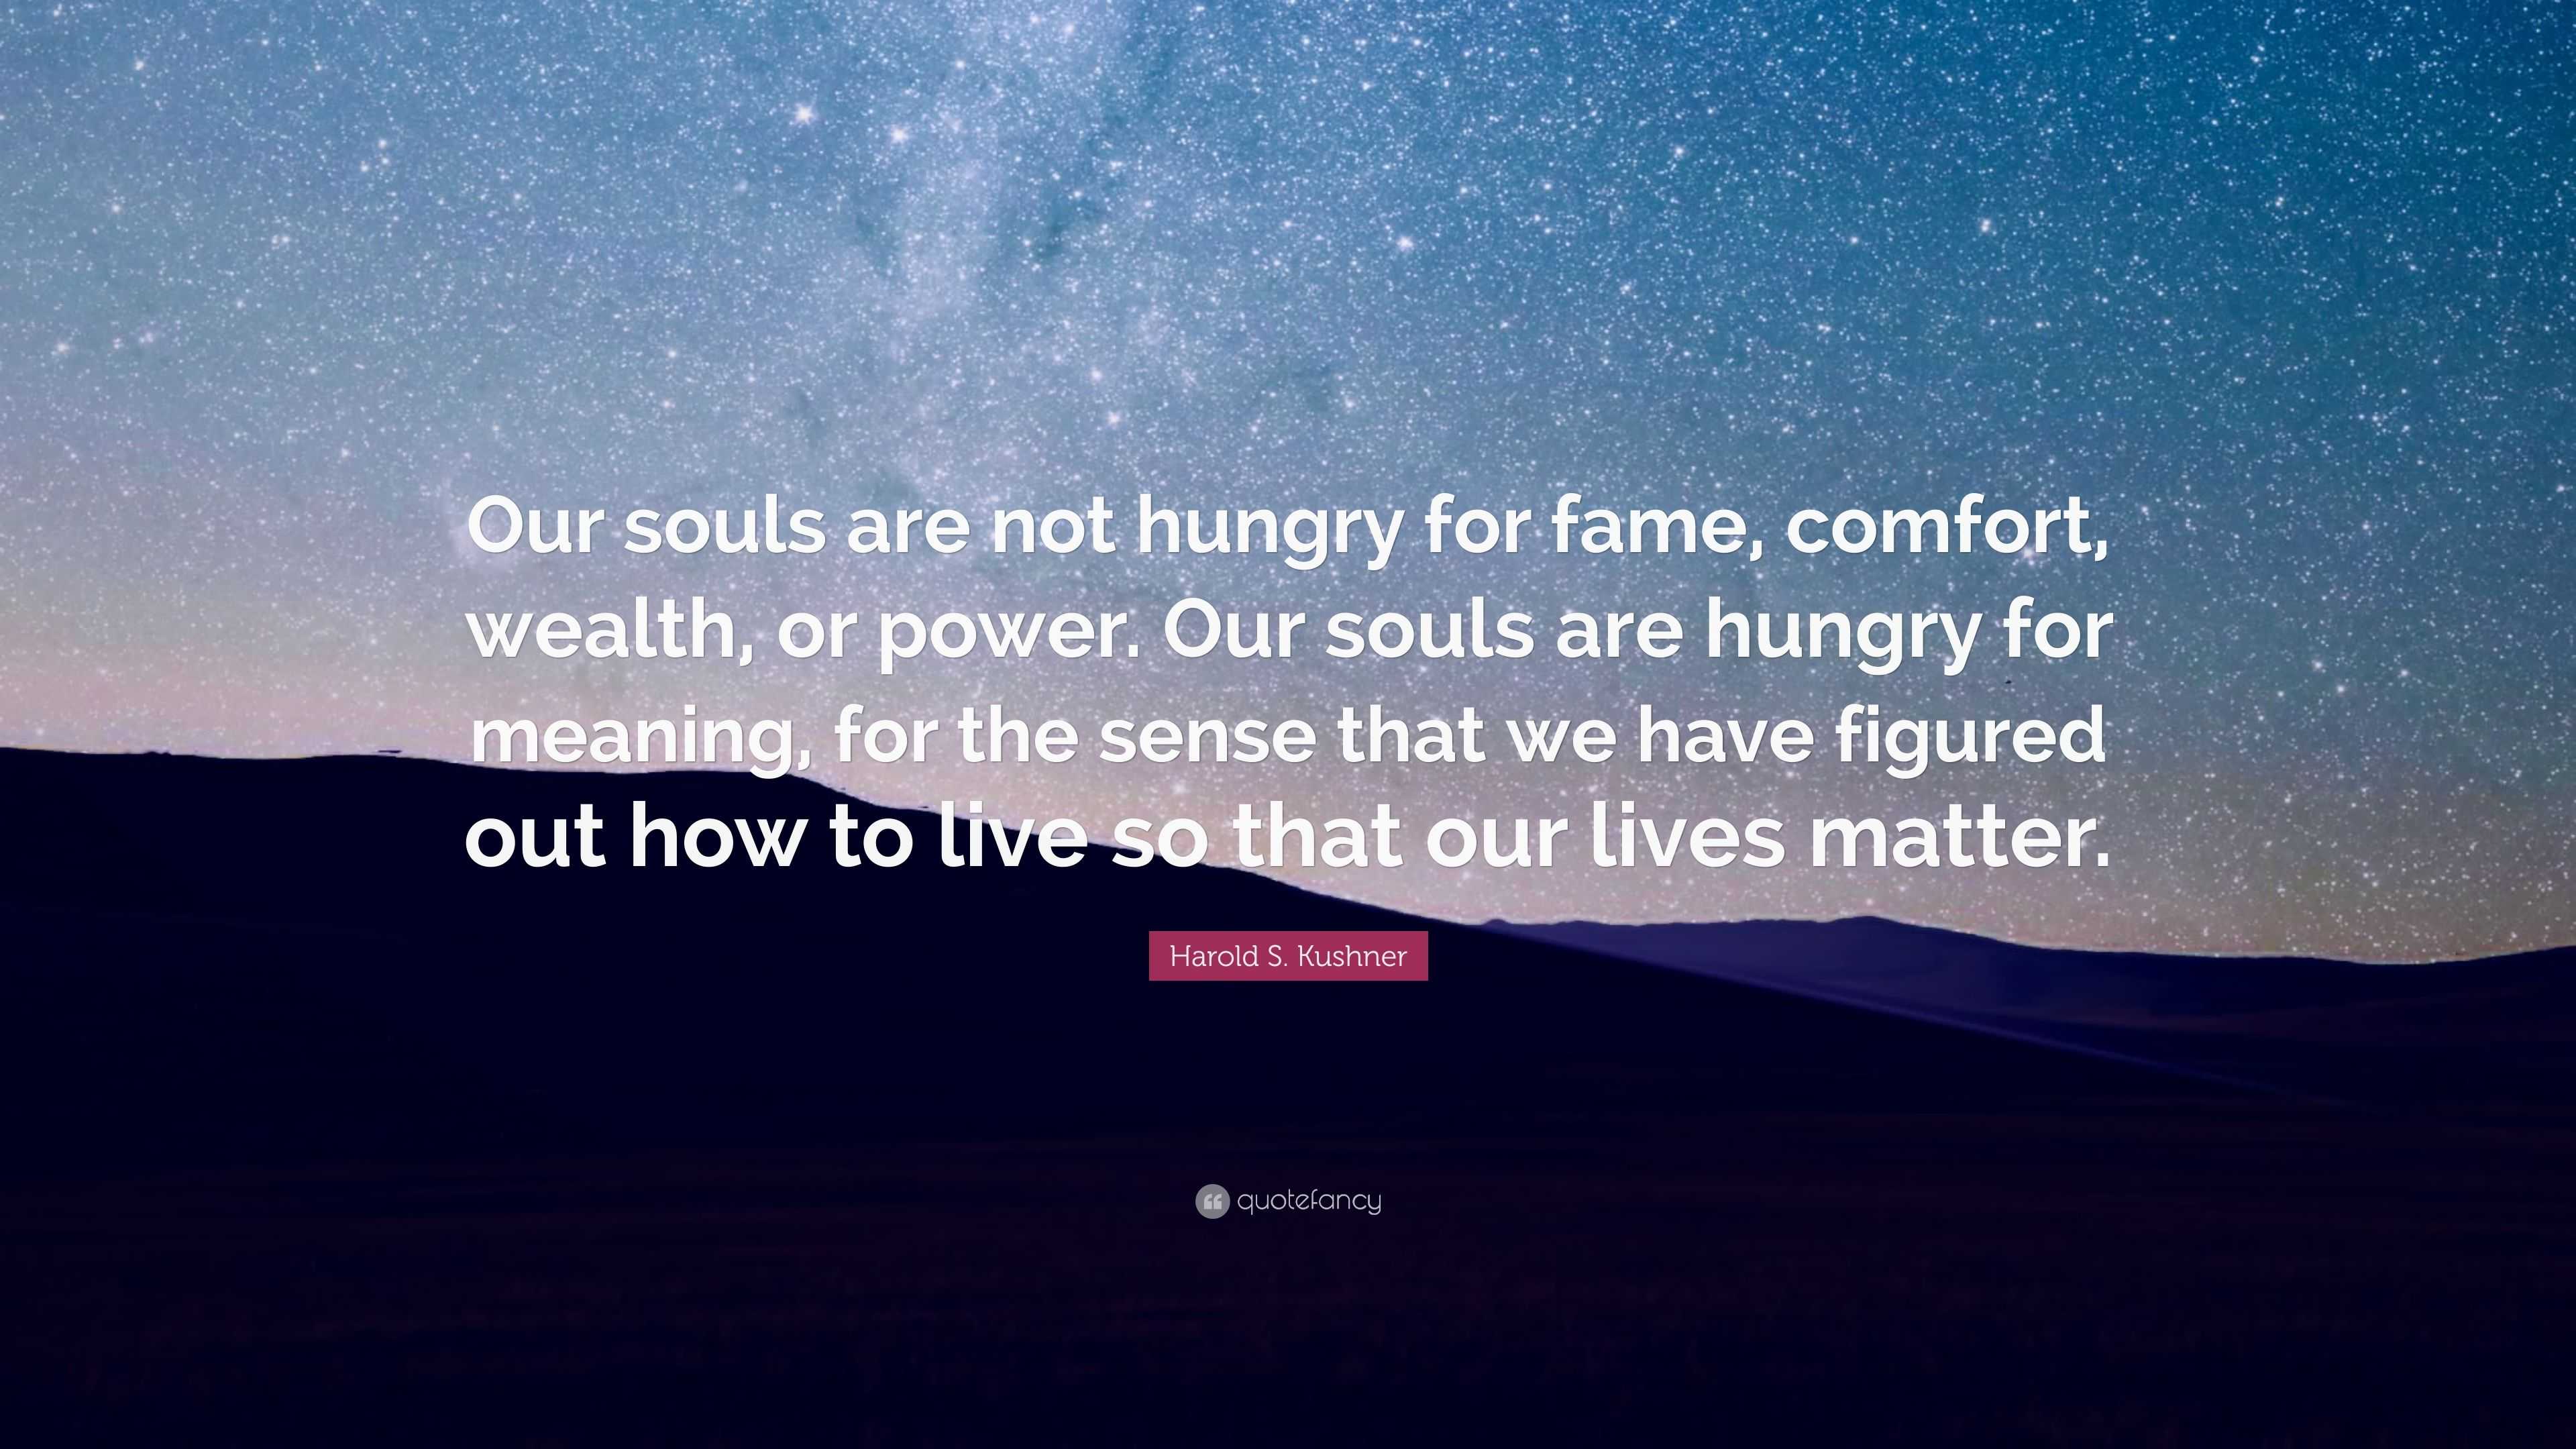 Harold S Kushner Quote “our Souls Are Not Hungry For Fame Comfort Wealth Or Power Our